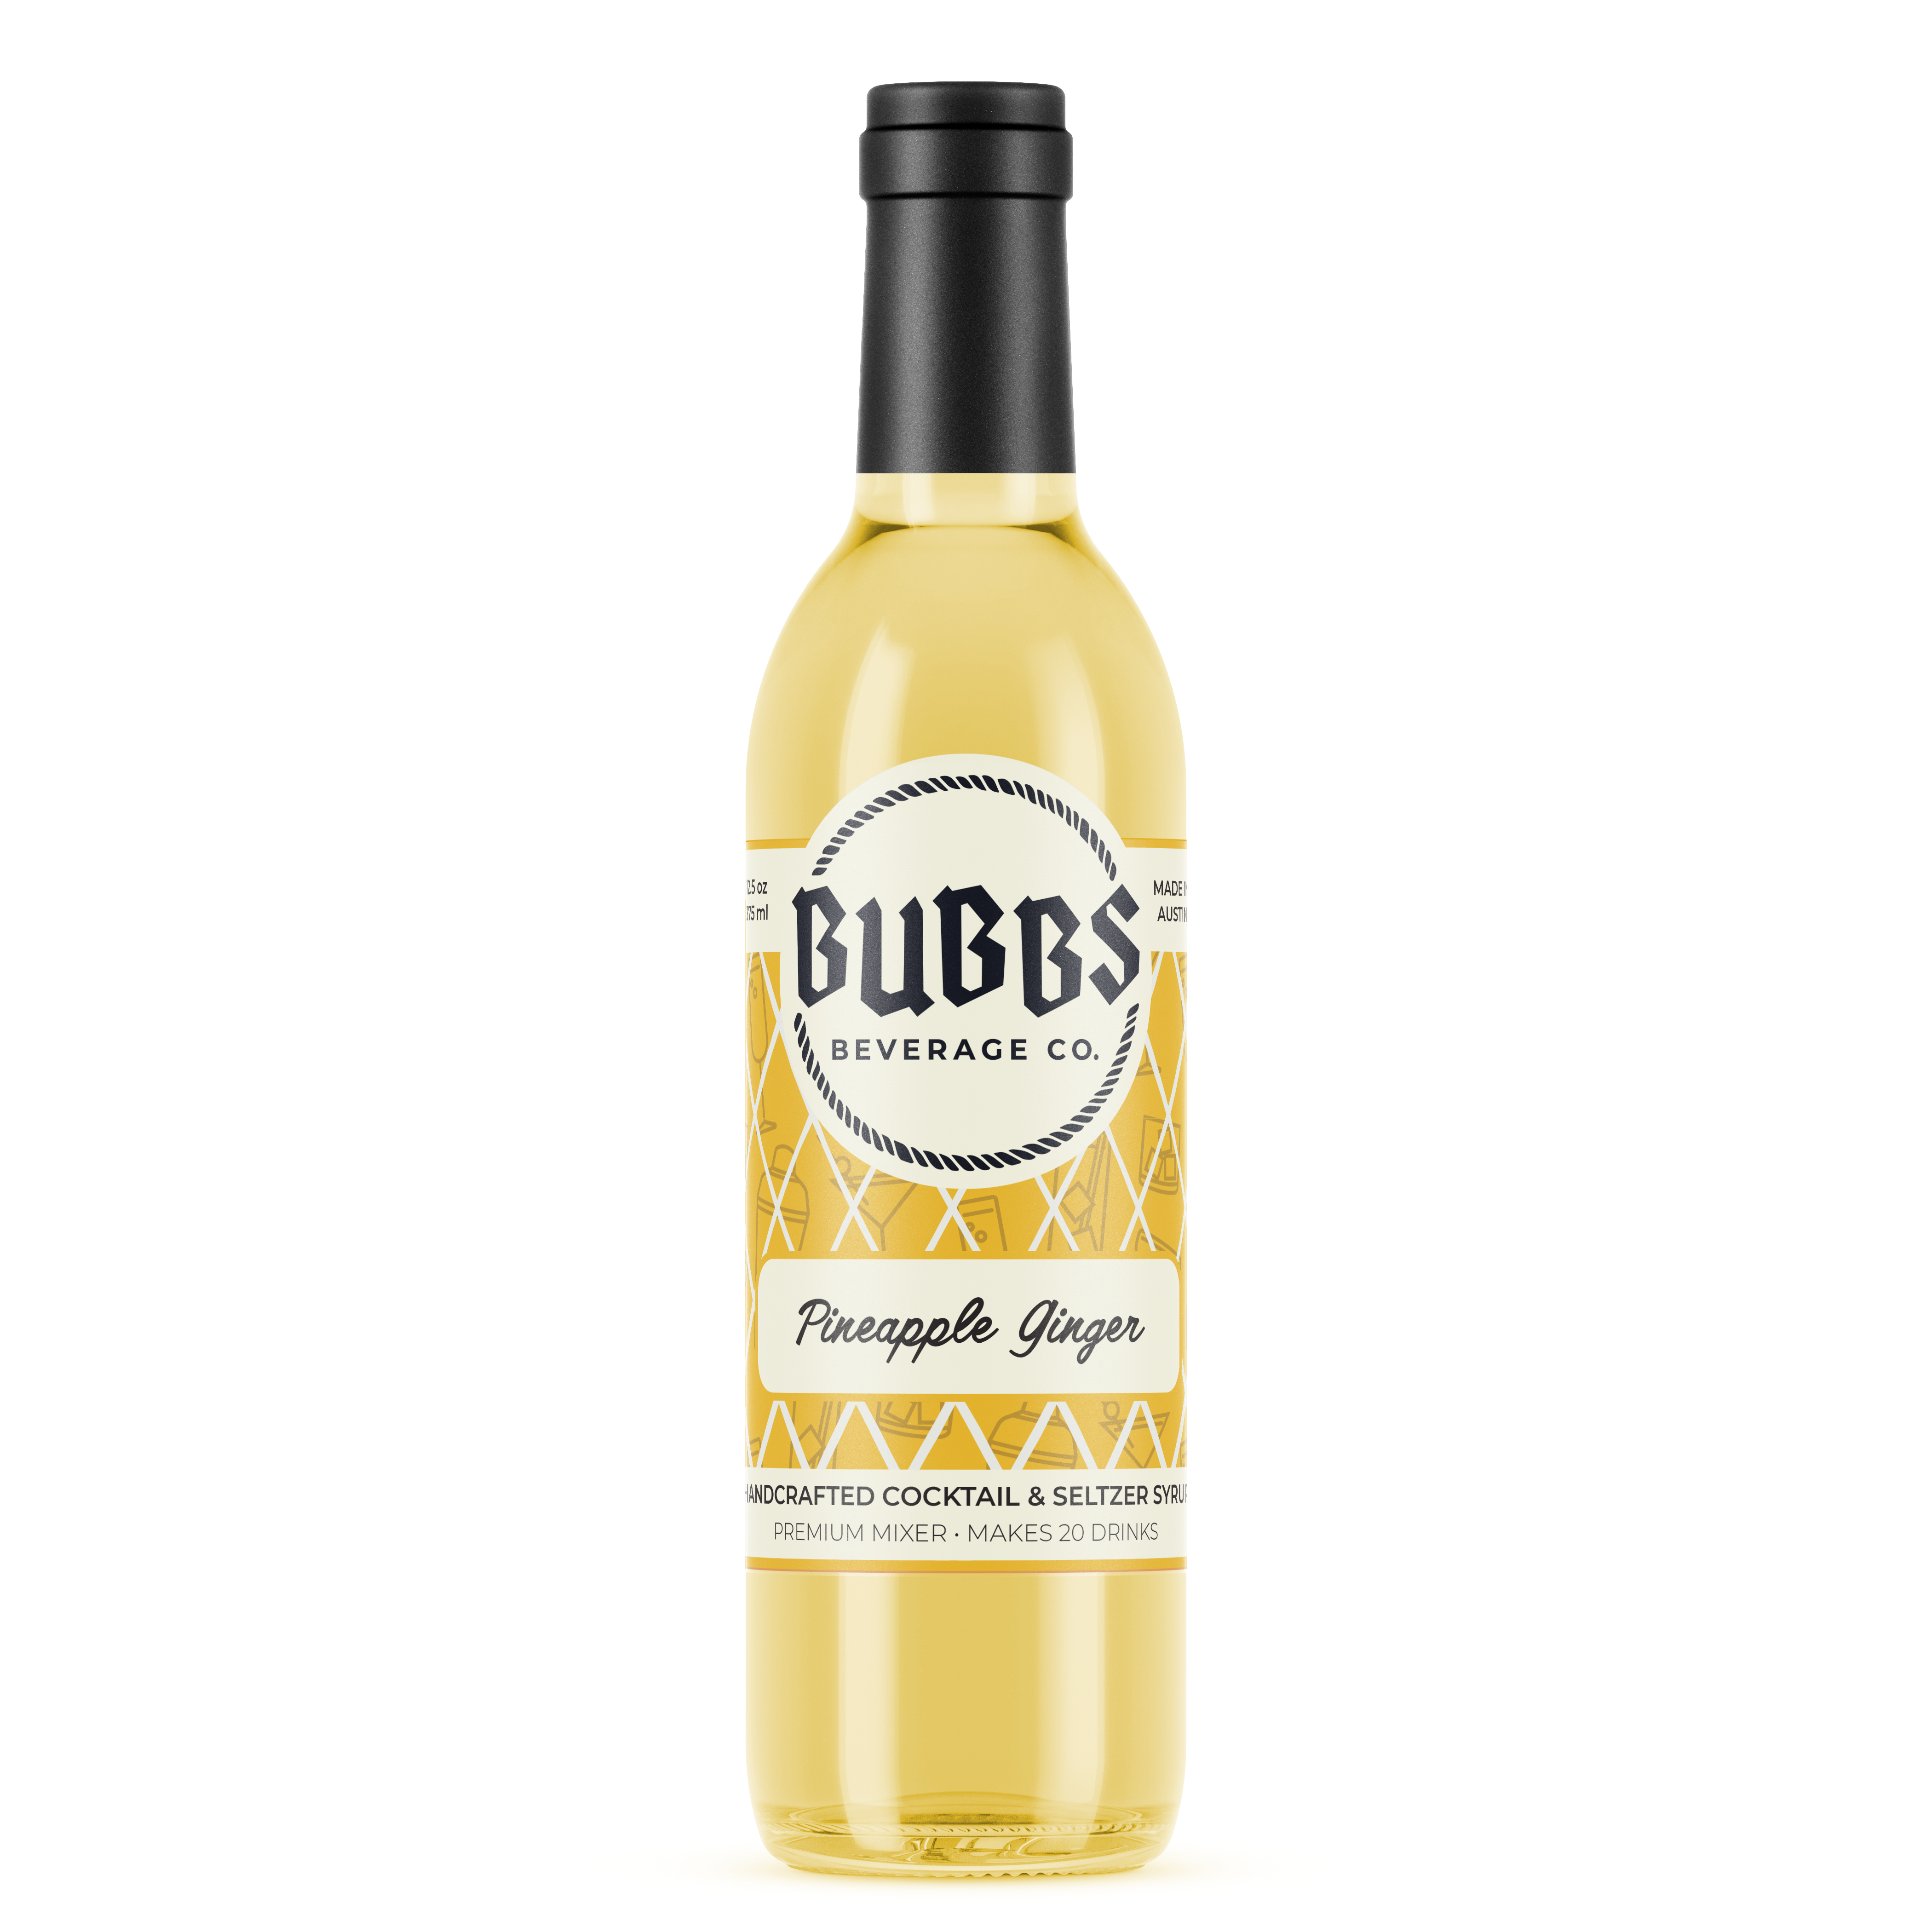 Bubbs Pineapple Ginger Syrup - 12oz